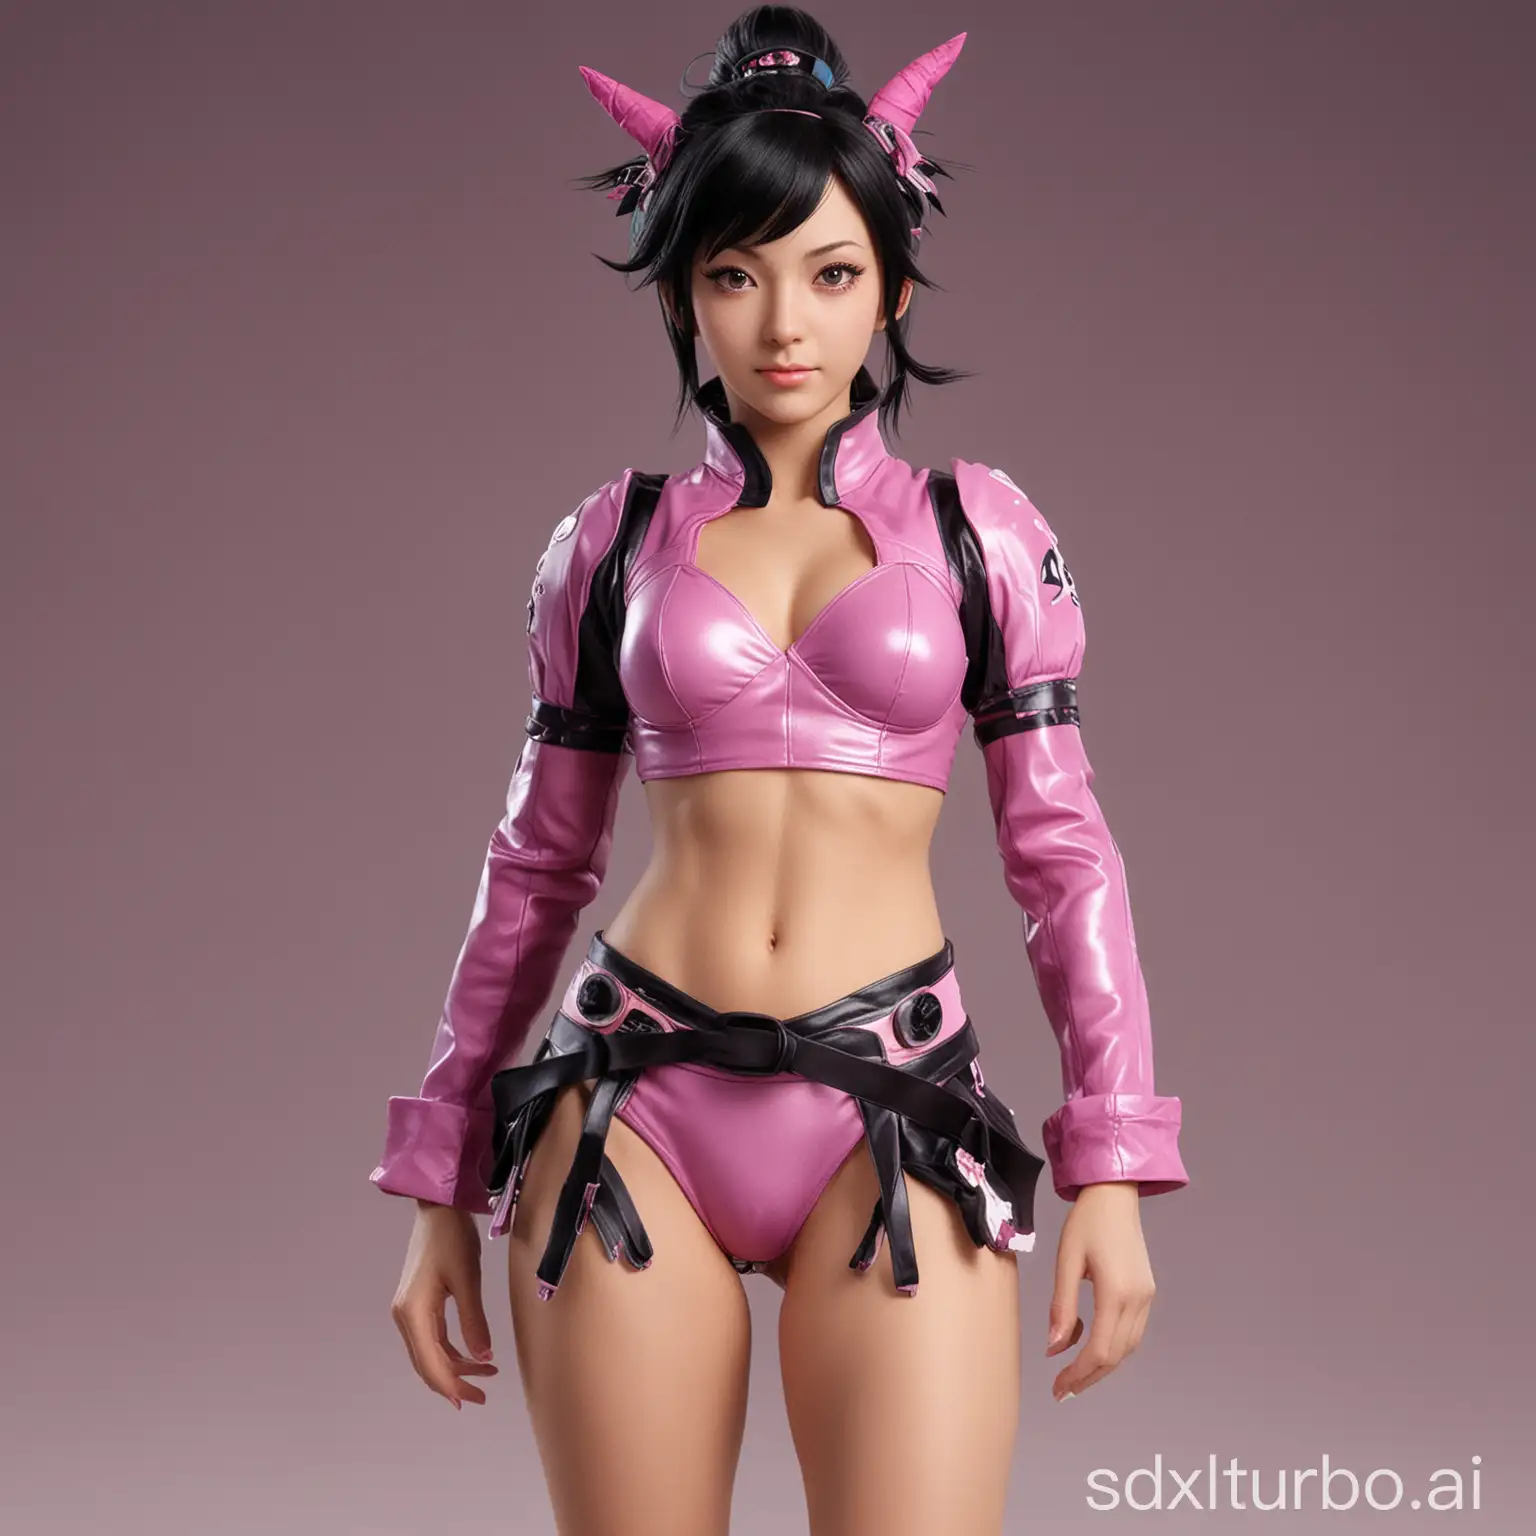 Martial-Arts-Fighter-Juri-Han-in-Dynamic-Action-Pose